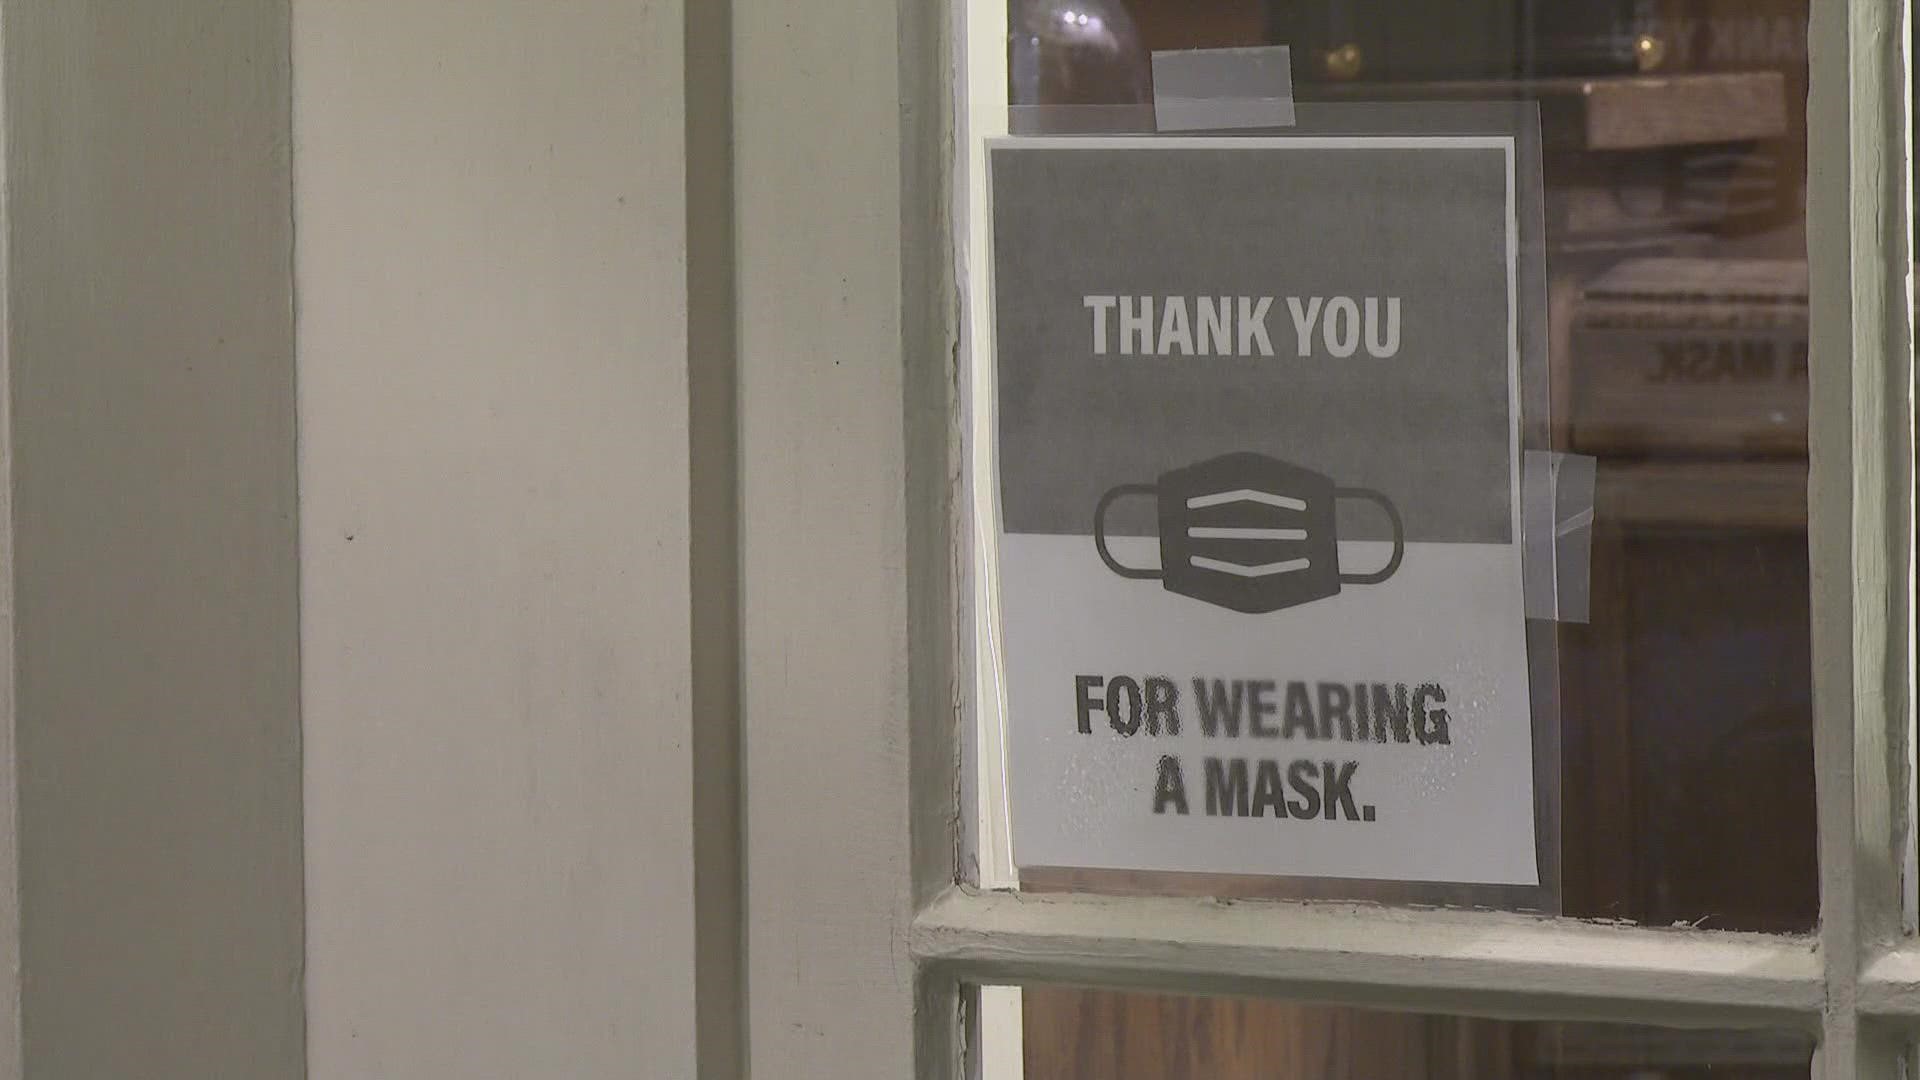 As of Wednesday, masks are required in all indoor public spaces in Portland for those two and older.